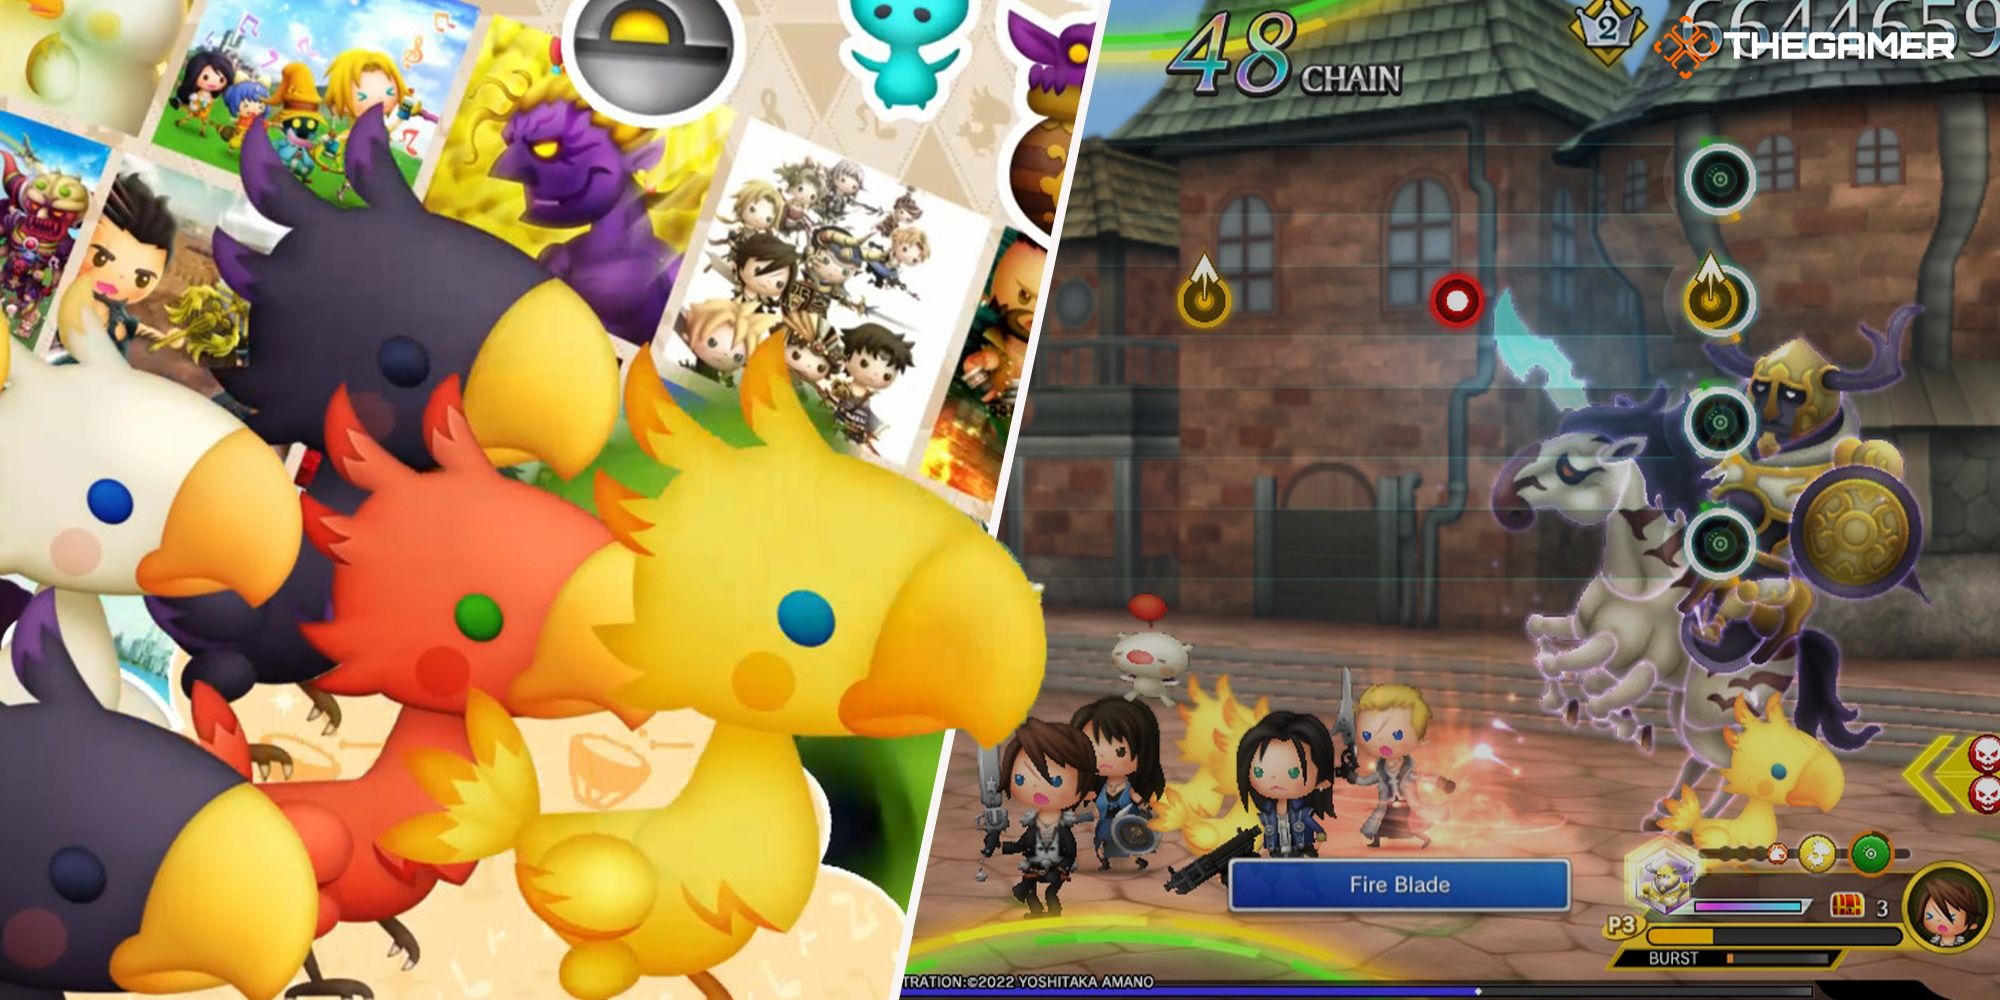 A flock of Chocobos charge toward Squall, Rinoa, Laguna, and Seifer during a Multi Battle in Theatrhythm: Final Bar Line.